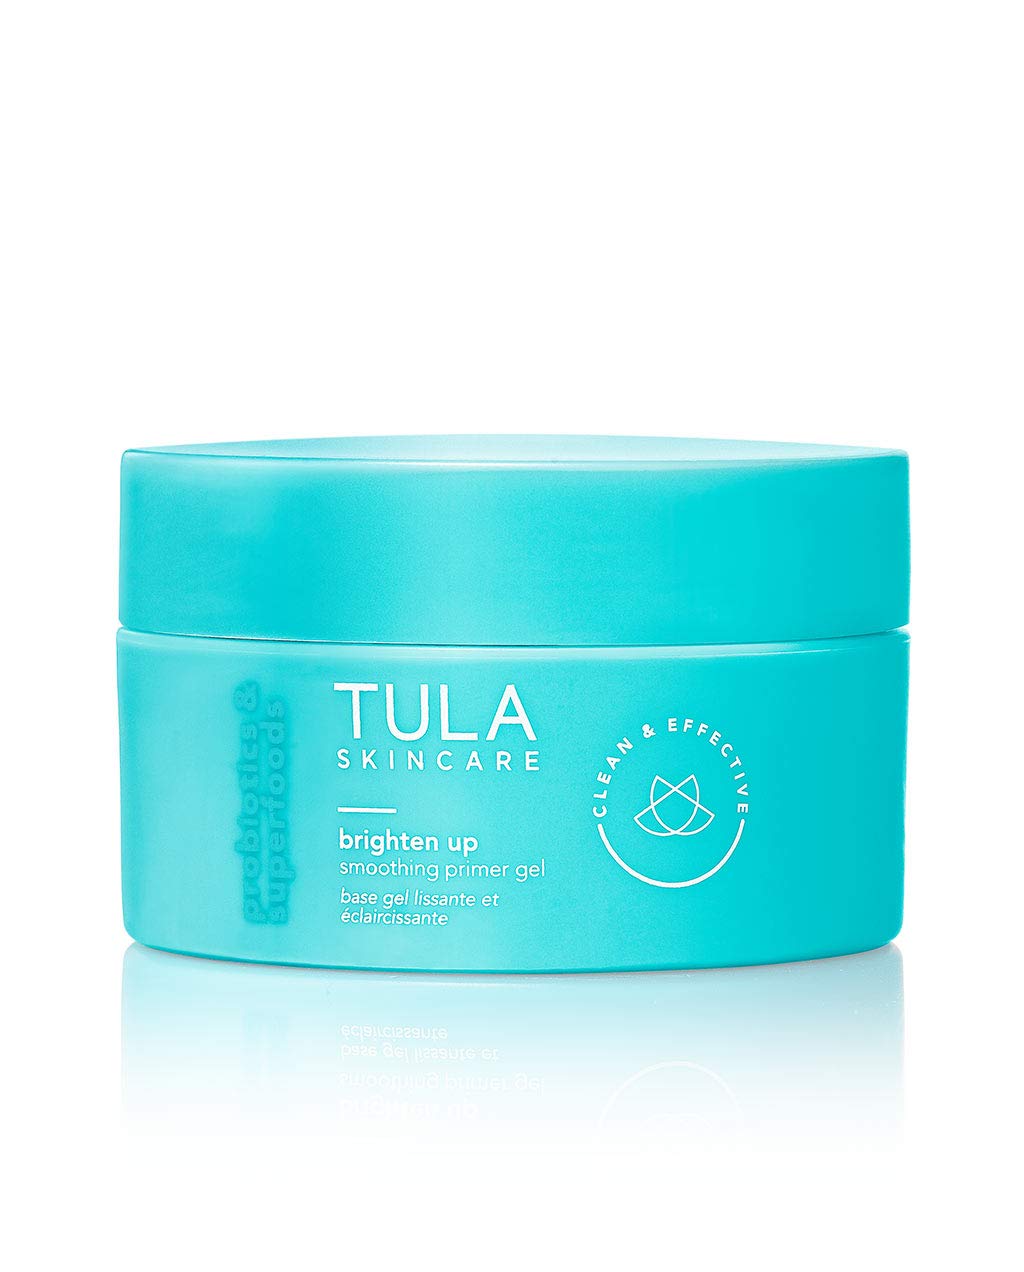  TULA Probiotic Skin Care Brighten Up Smoothing Primer Gel | Silicone-Free, Non-Comedogenic Face Primer Grips Makeup, Infused with Yuzu and Willowherb | 1.41 fl. oz.